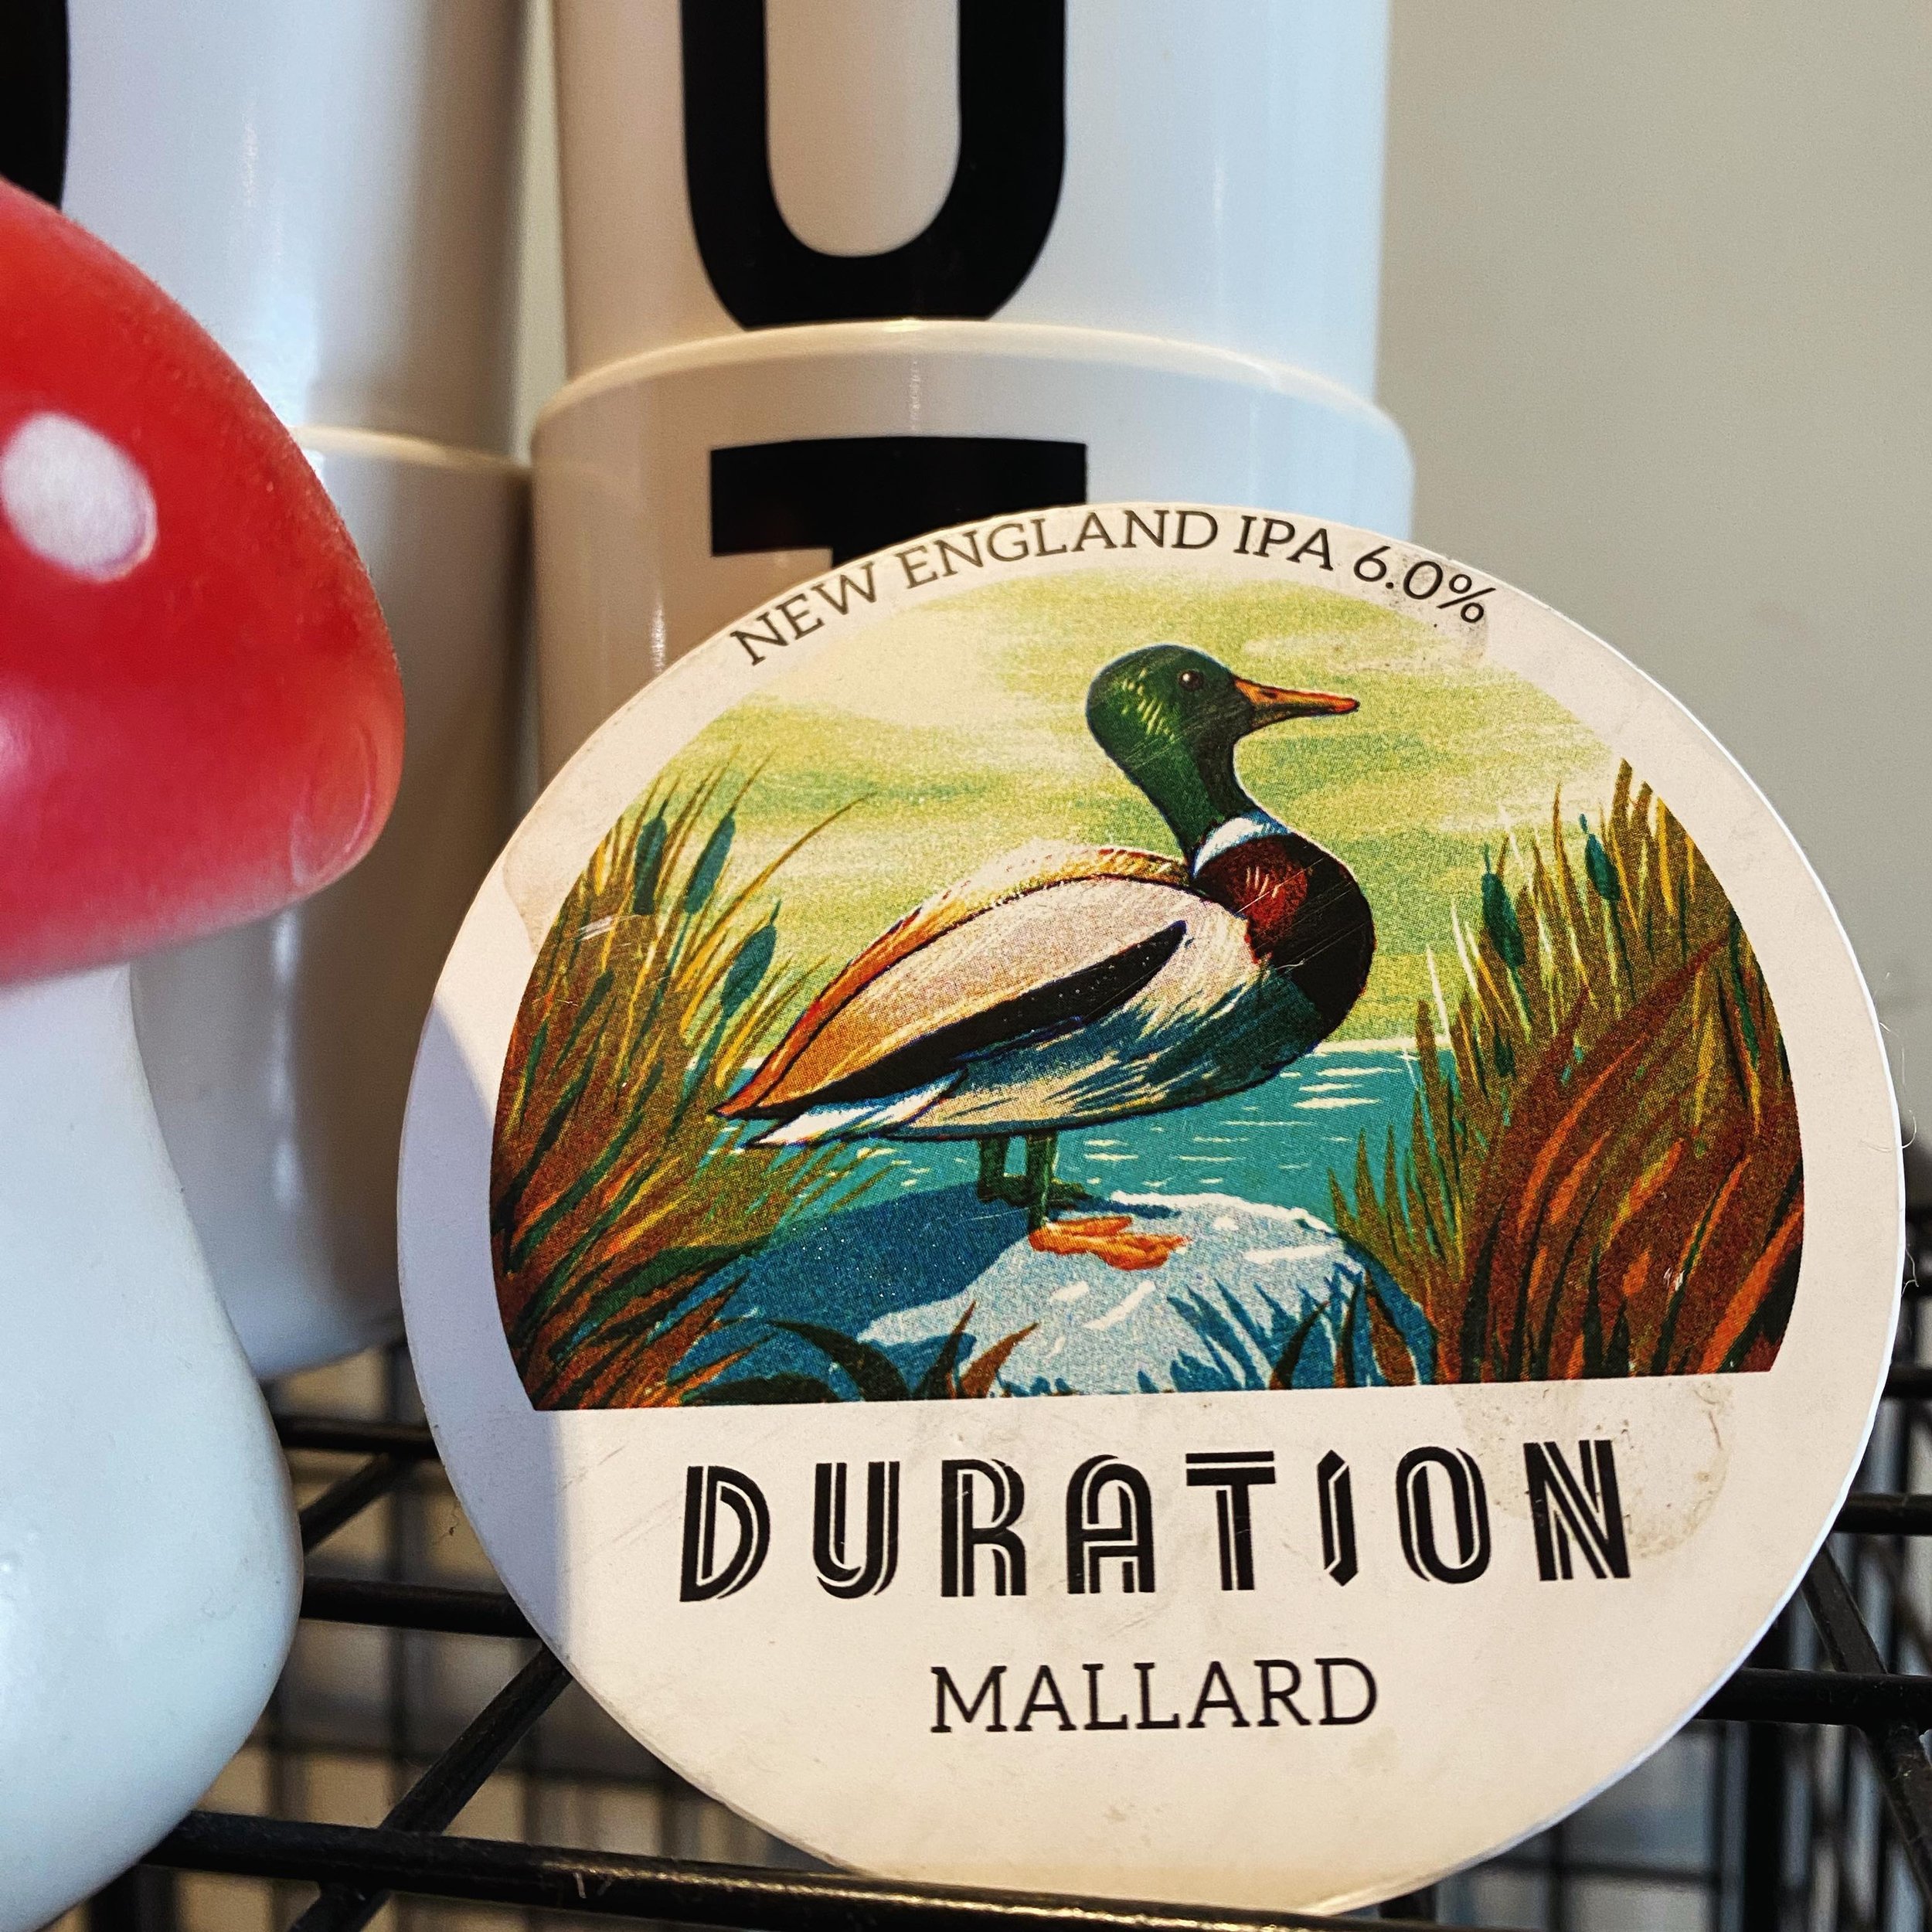 We had to sneak in one of our fav breweries #onthetaps before we left and couldn&rsquo;t resist this one duckies 🦆 Mallard from @durationbeer is a soft, juicy, hazy bodied #newenglandipa style full of mango, pineapple and citrus notes. Hops used inc